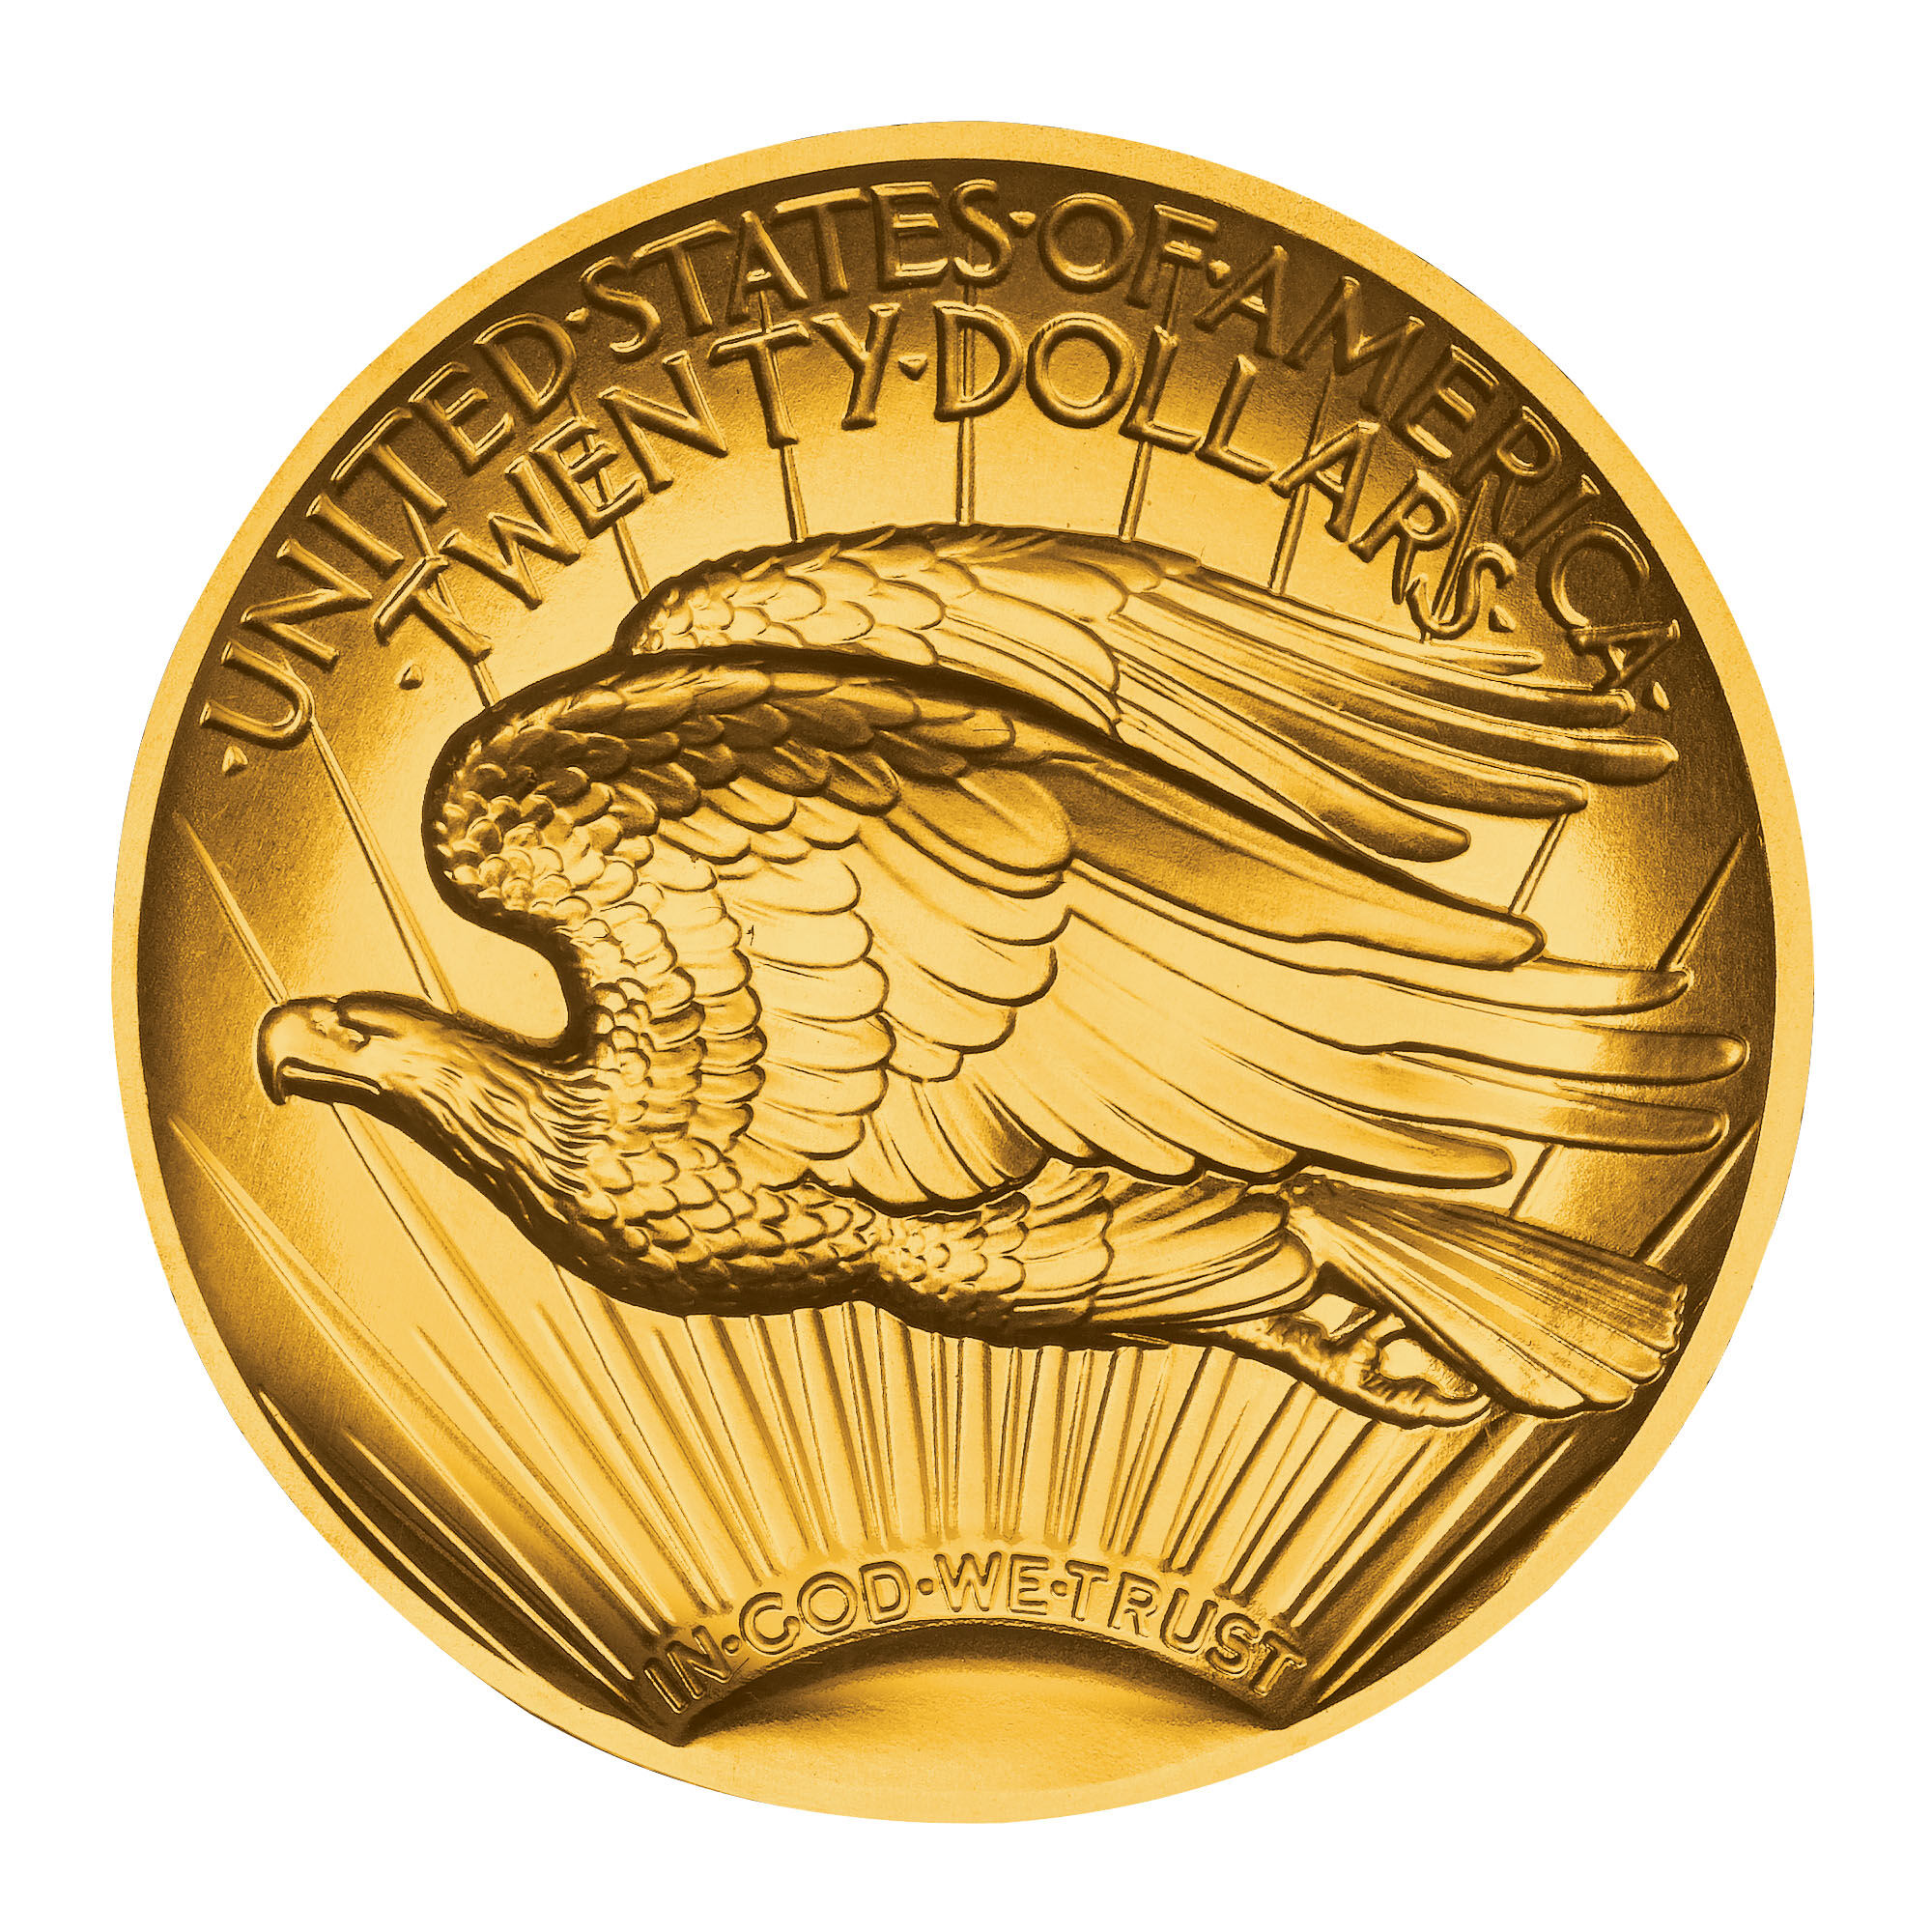 The Ultra High Relief Gold Coin